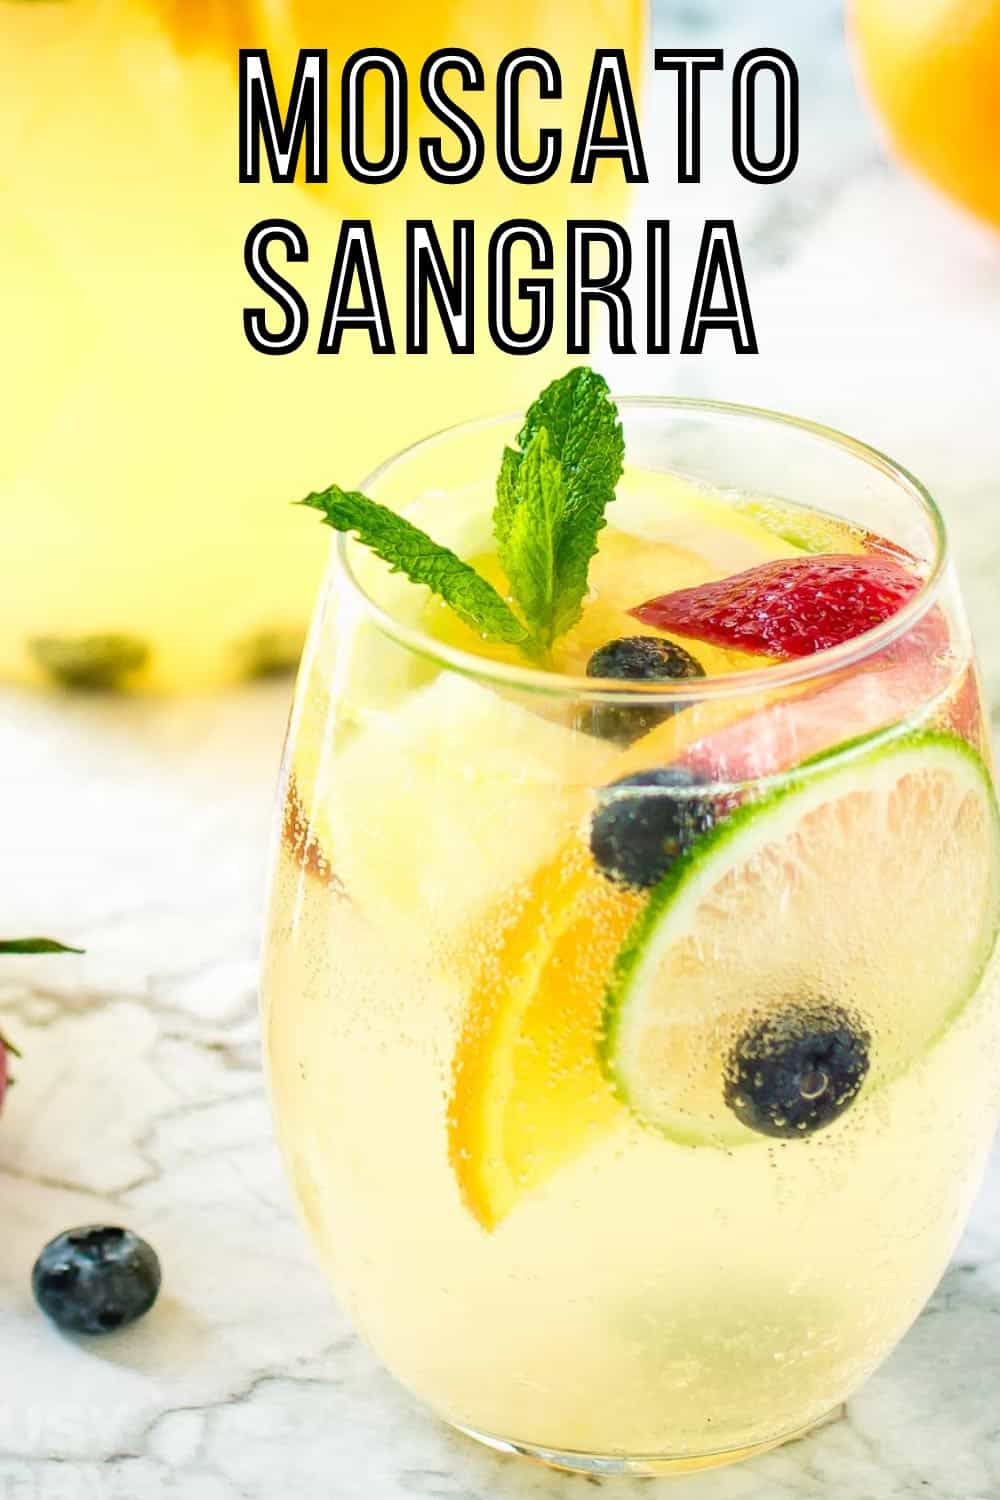 Side shot of a glass wine tumbler with sangria garnished with mint and fruits on a marble surface with a pitcher of it in the background.